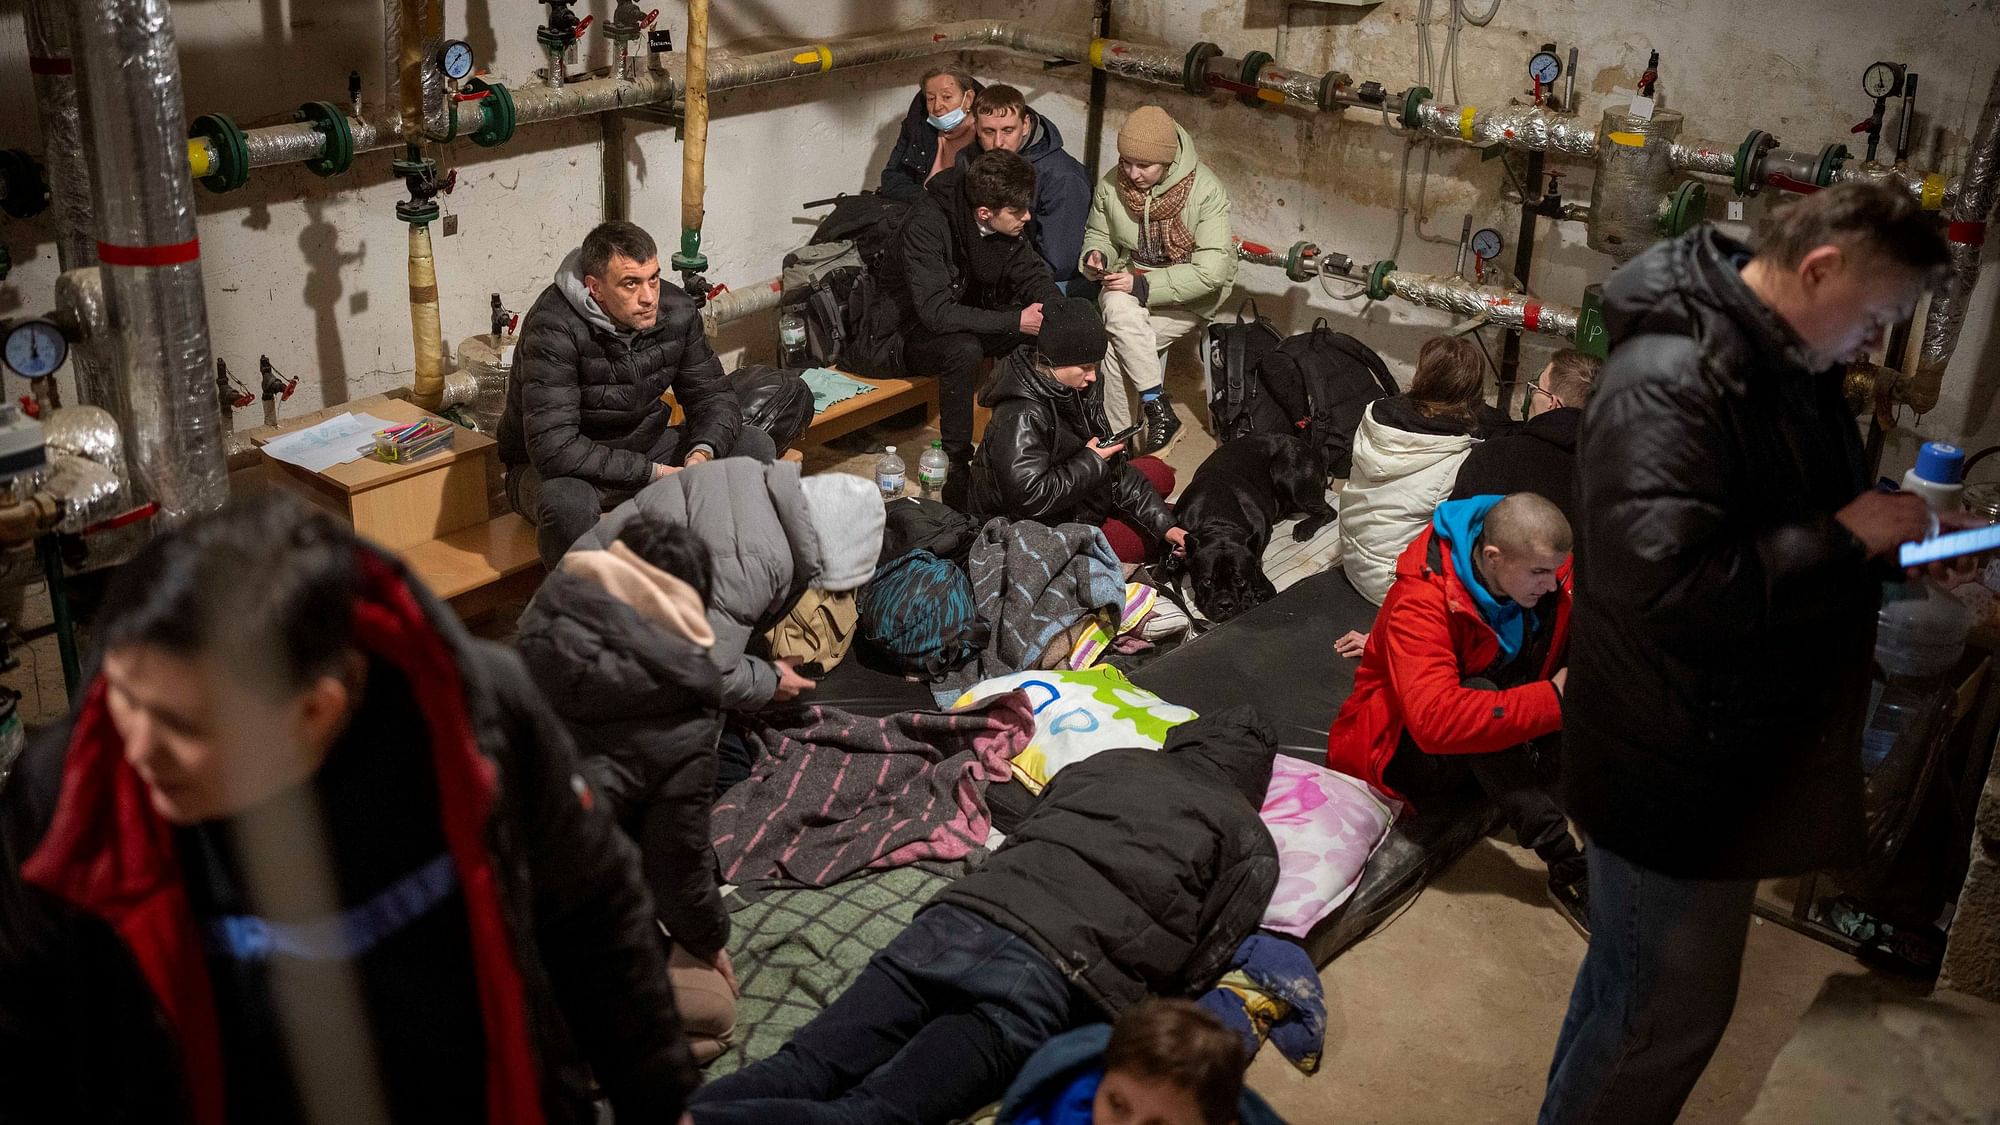 <div class="paragraphs"><p>People take shelter at a building basement in the city of Kyiv.<br><br></p></div>